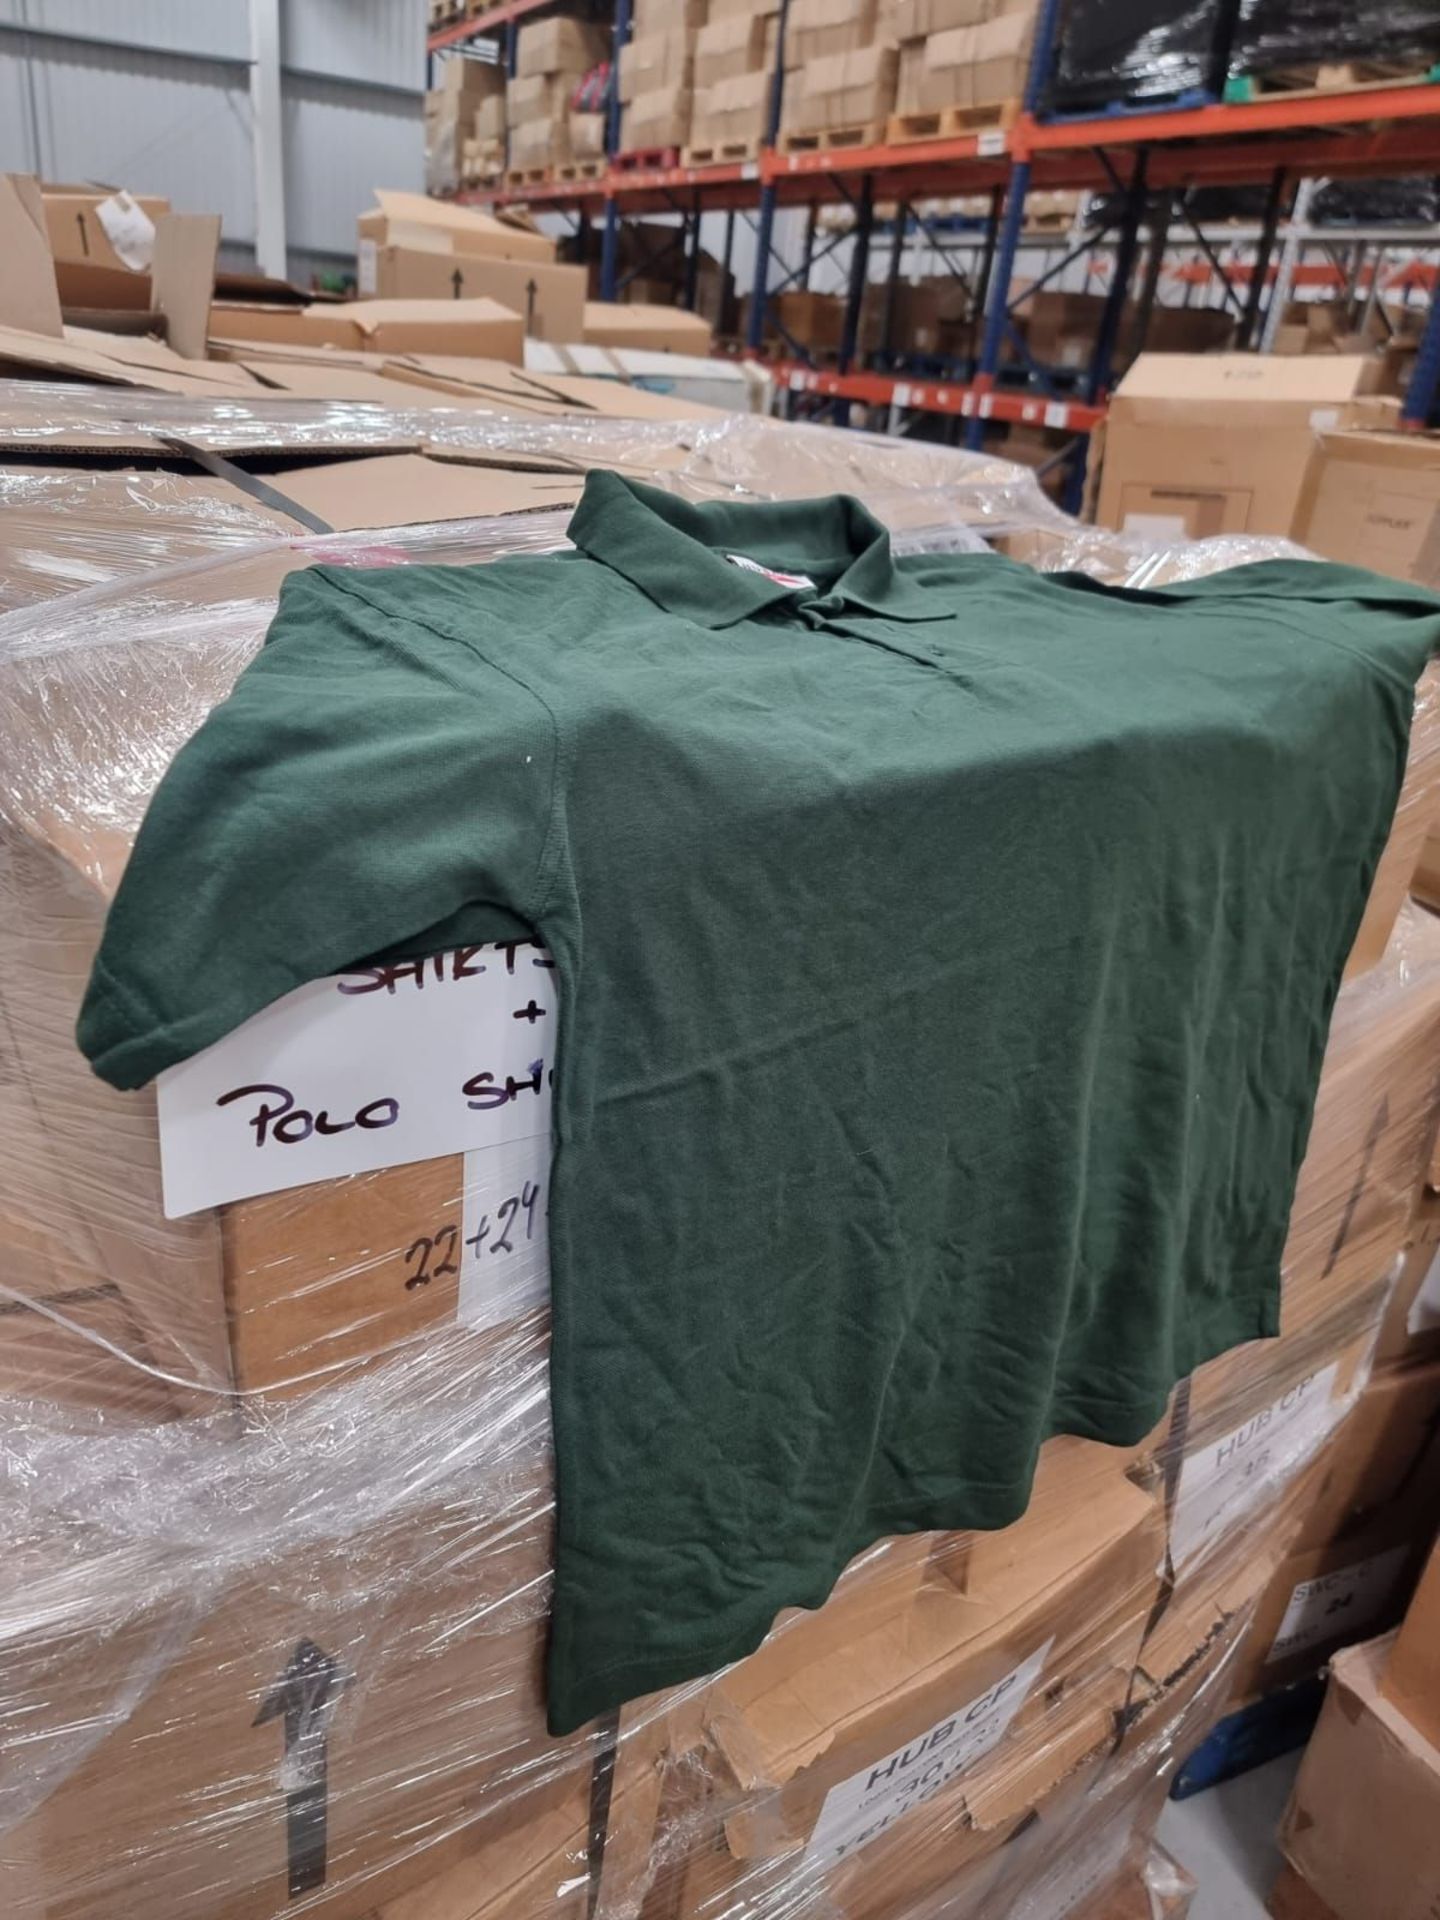 PALLET TO CONTAIN A LARGE QUANTITY OF NEW CLOTHING GOODS. MAY INCLUDE ITEMS SUCH AS: T-SHIRTS,